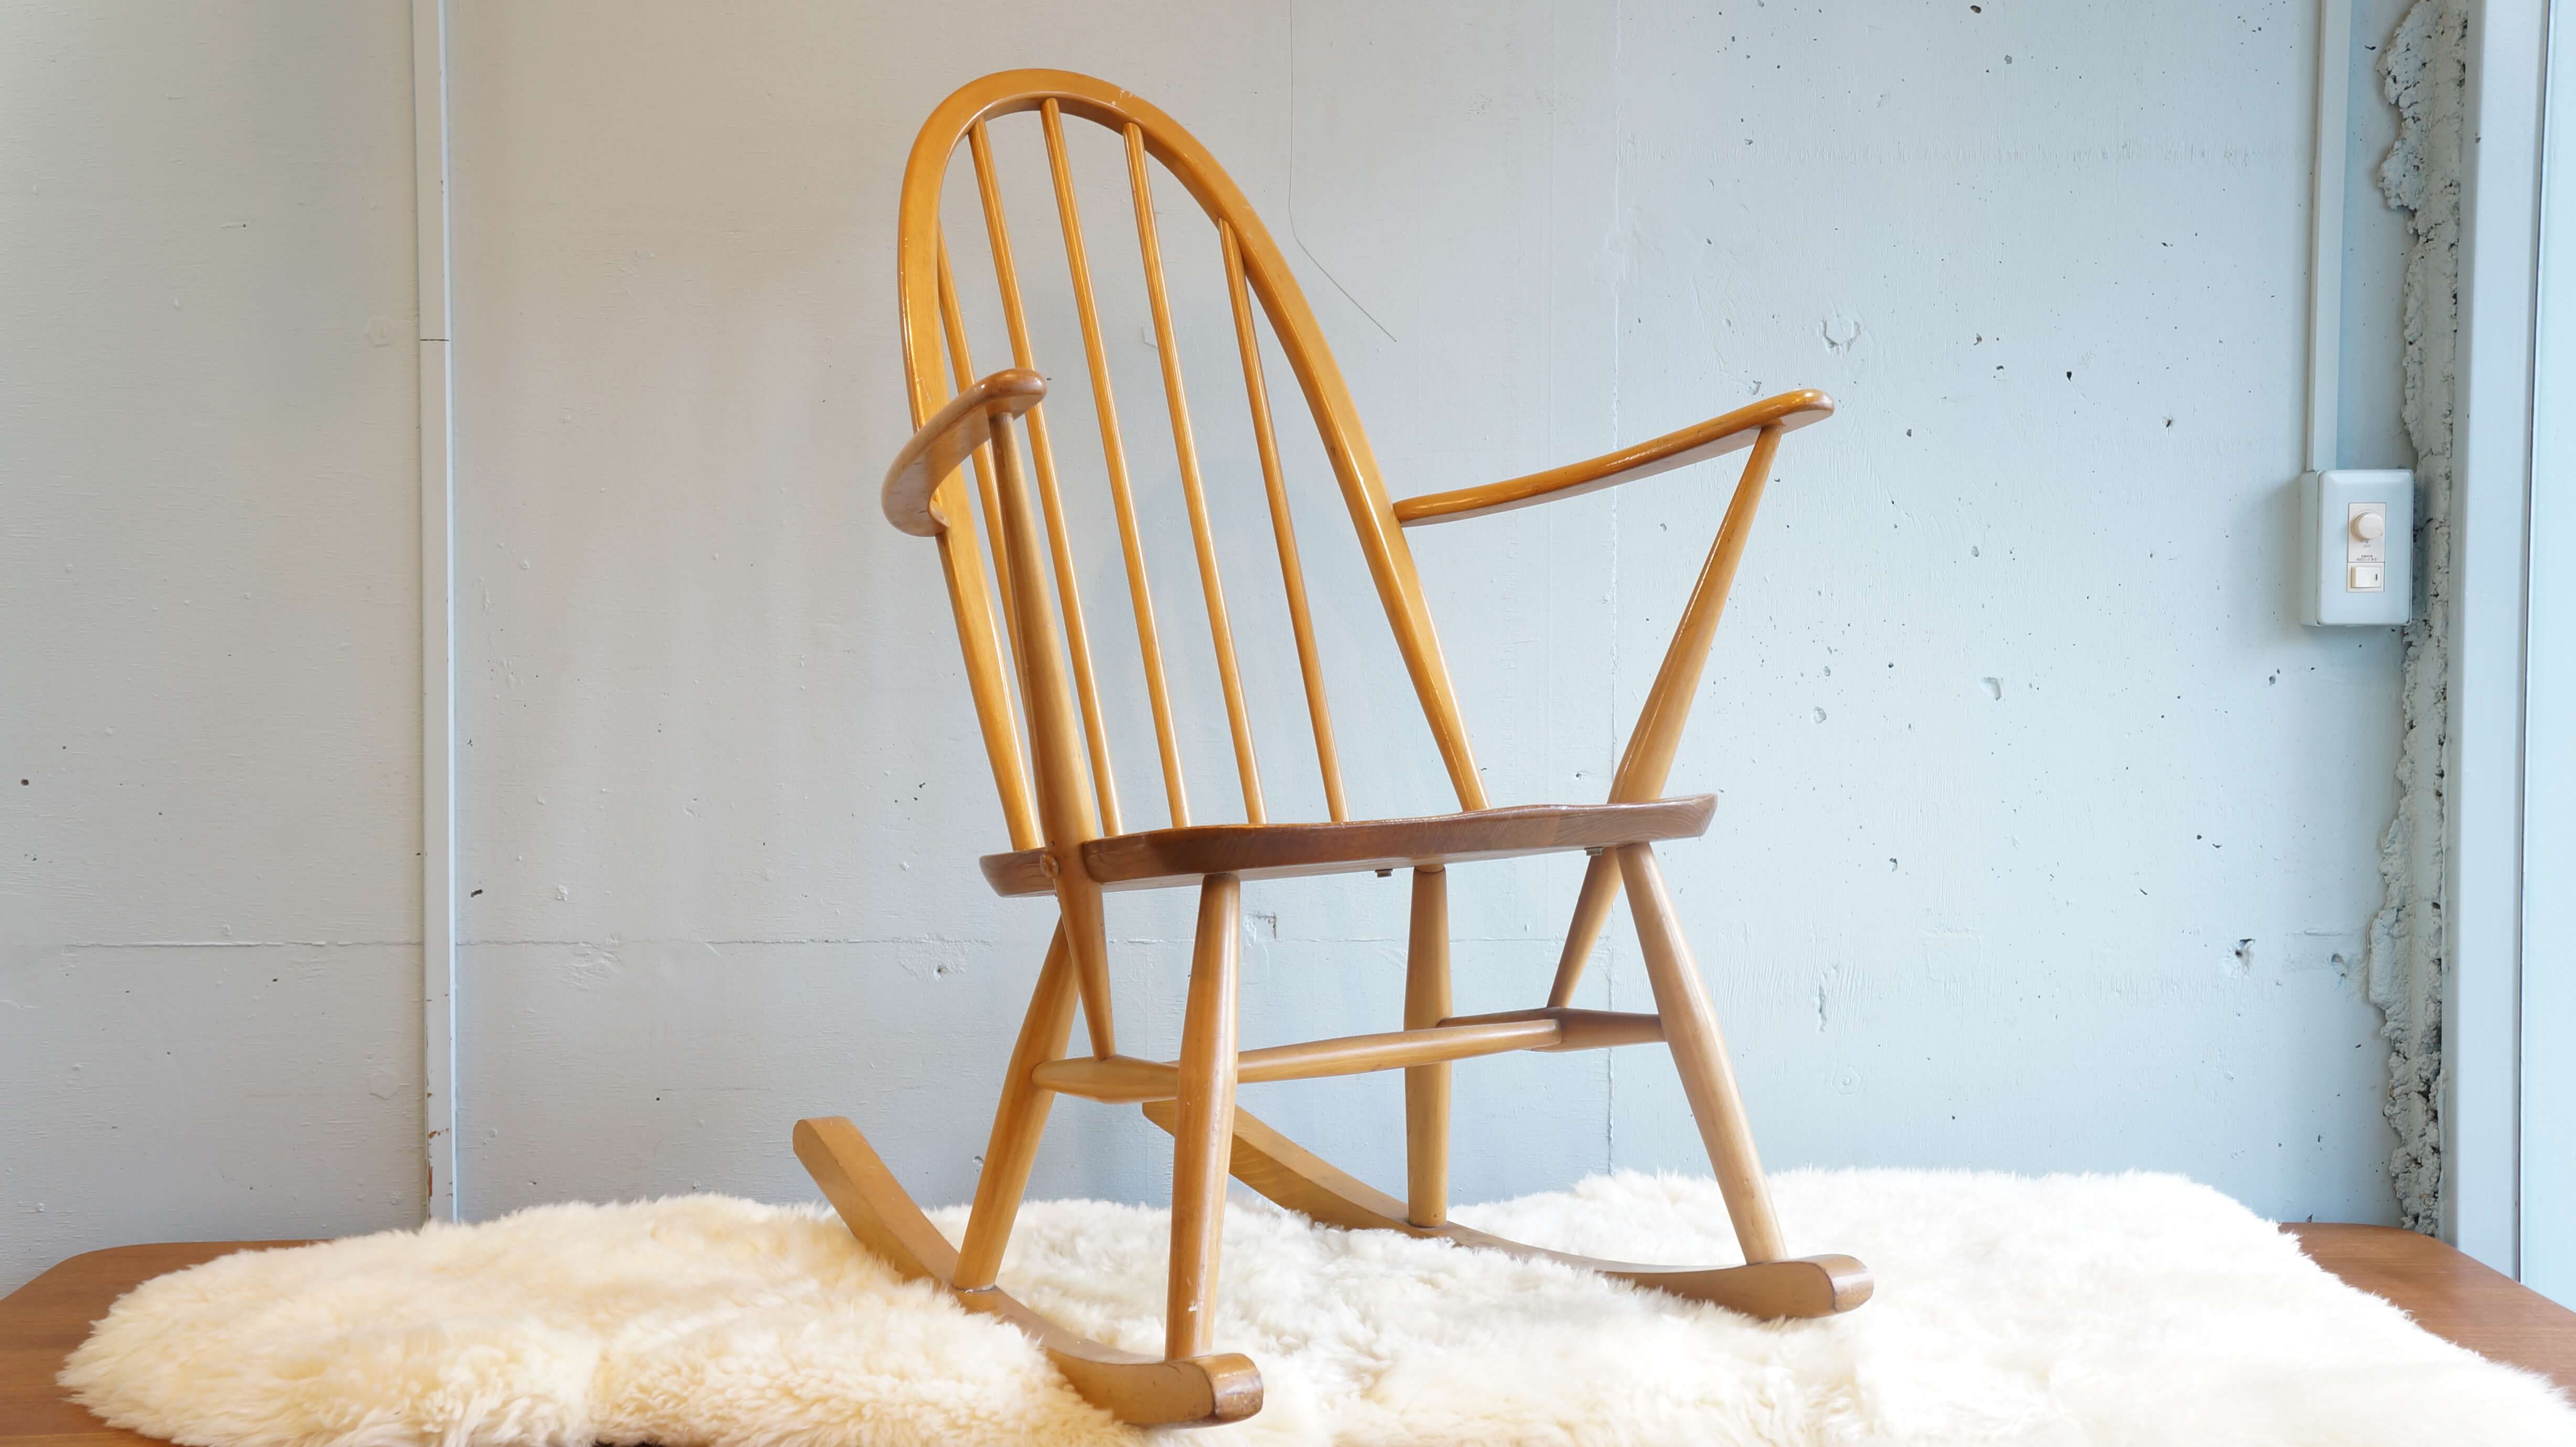 ERCOL Rocking Quaker chair / アーコール ロッキング クエーカー チェア